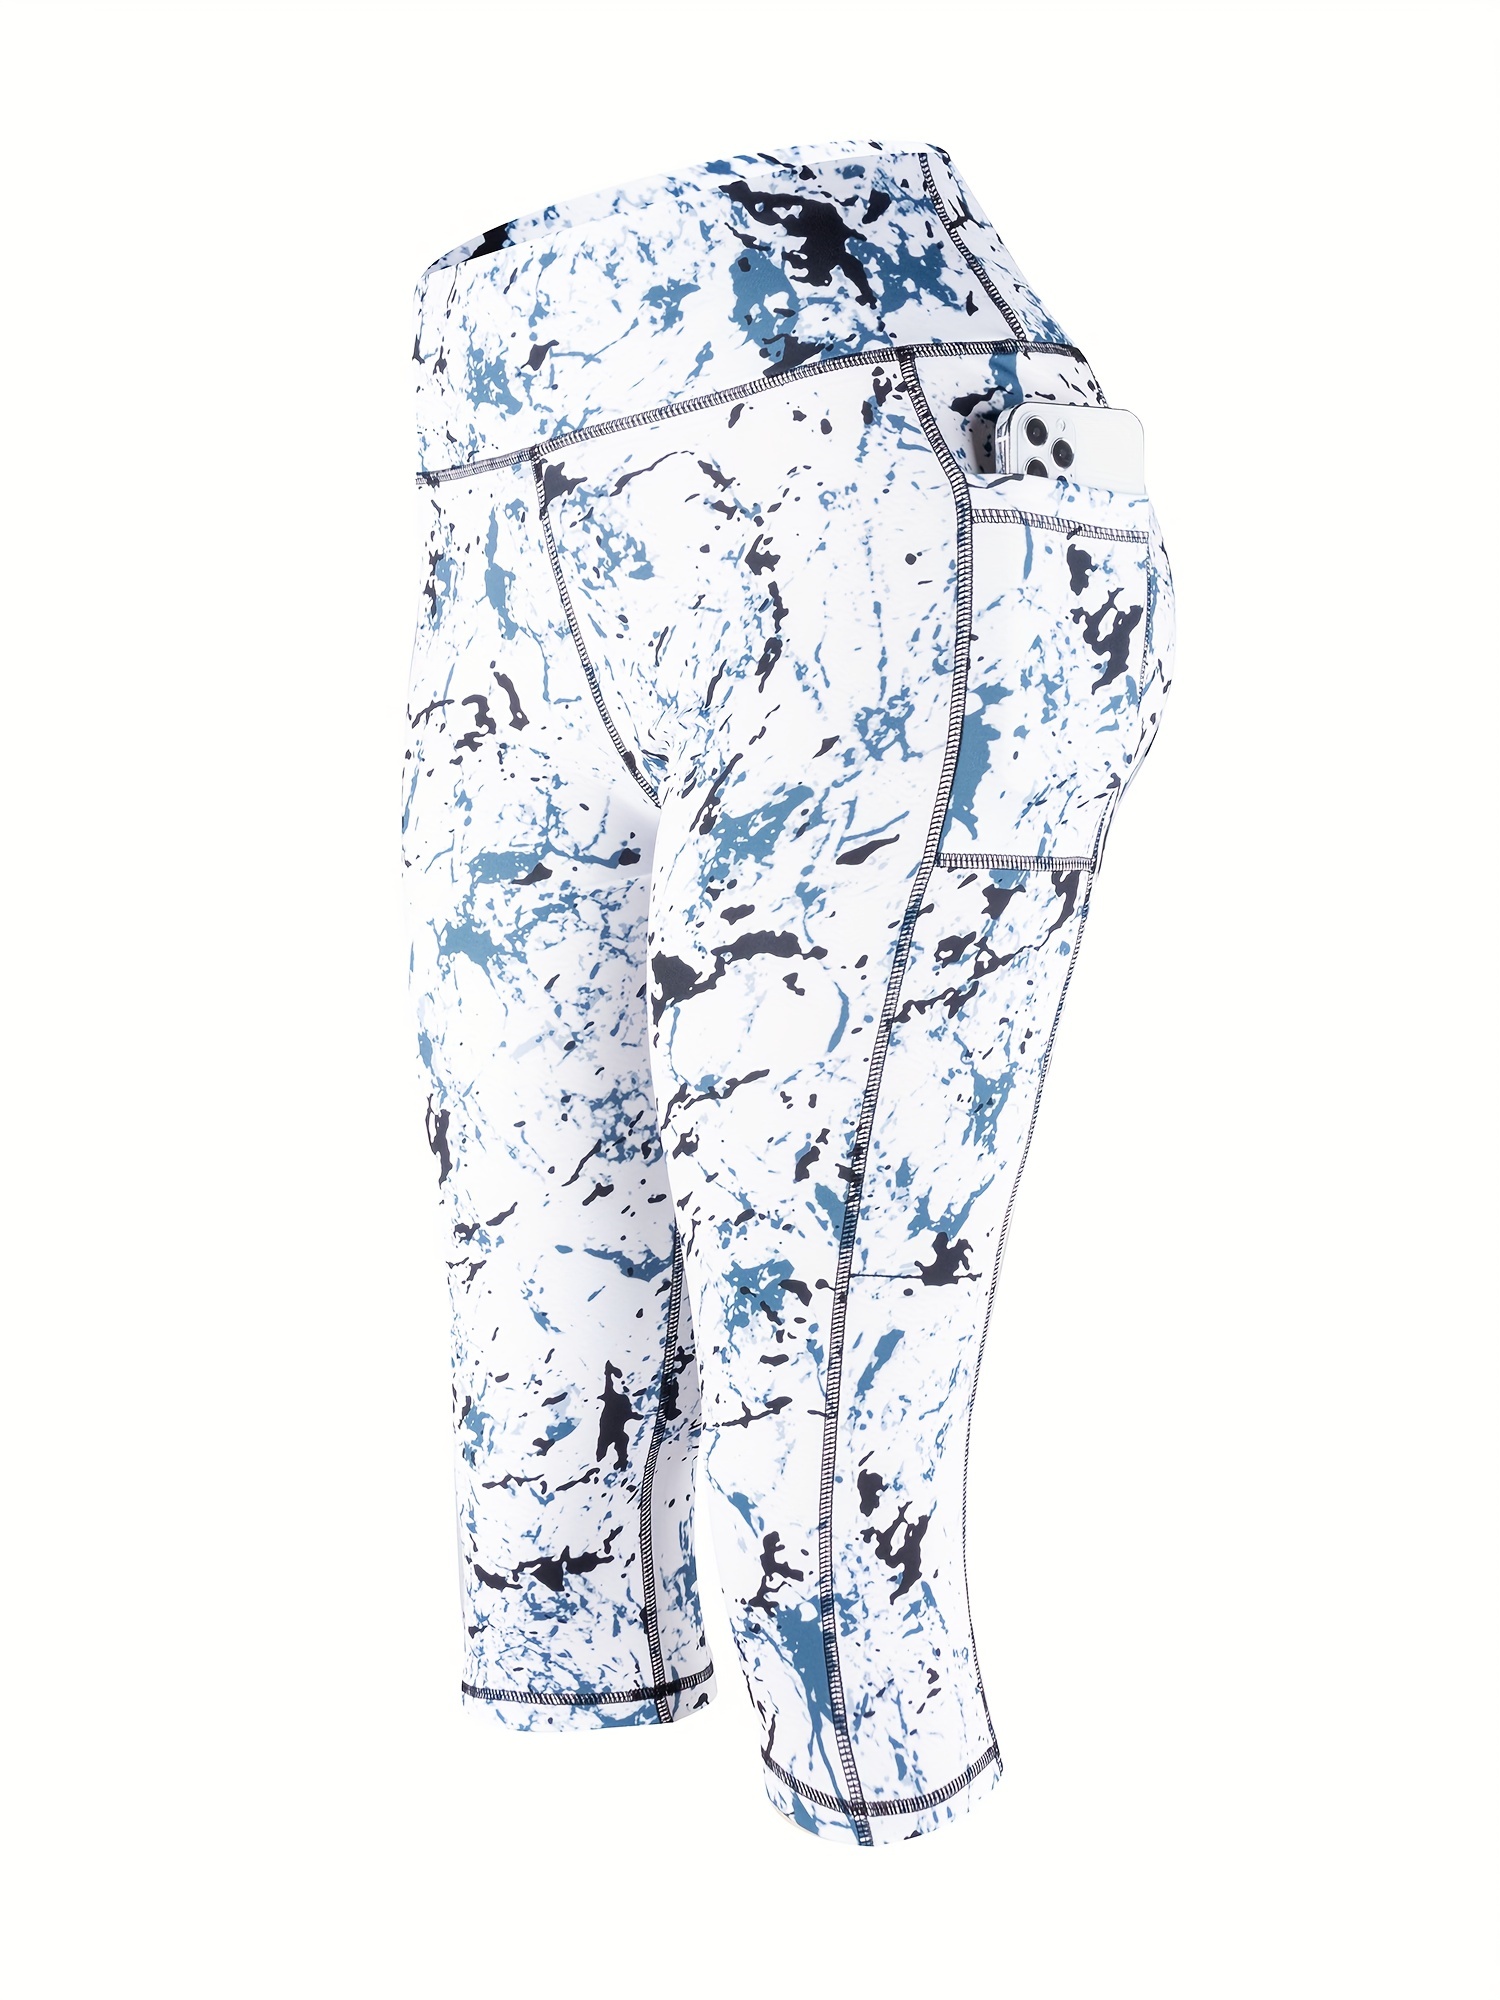 High Waist Printed Yoga Capris With Pockets For Women Stretchy